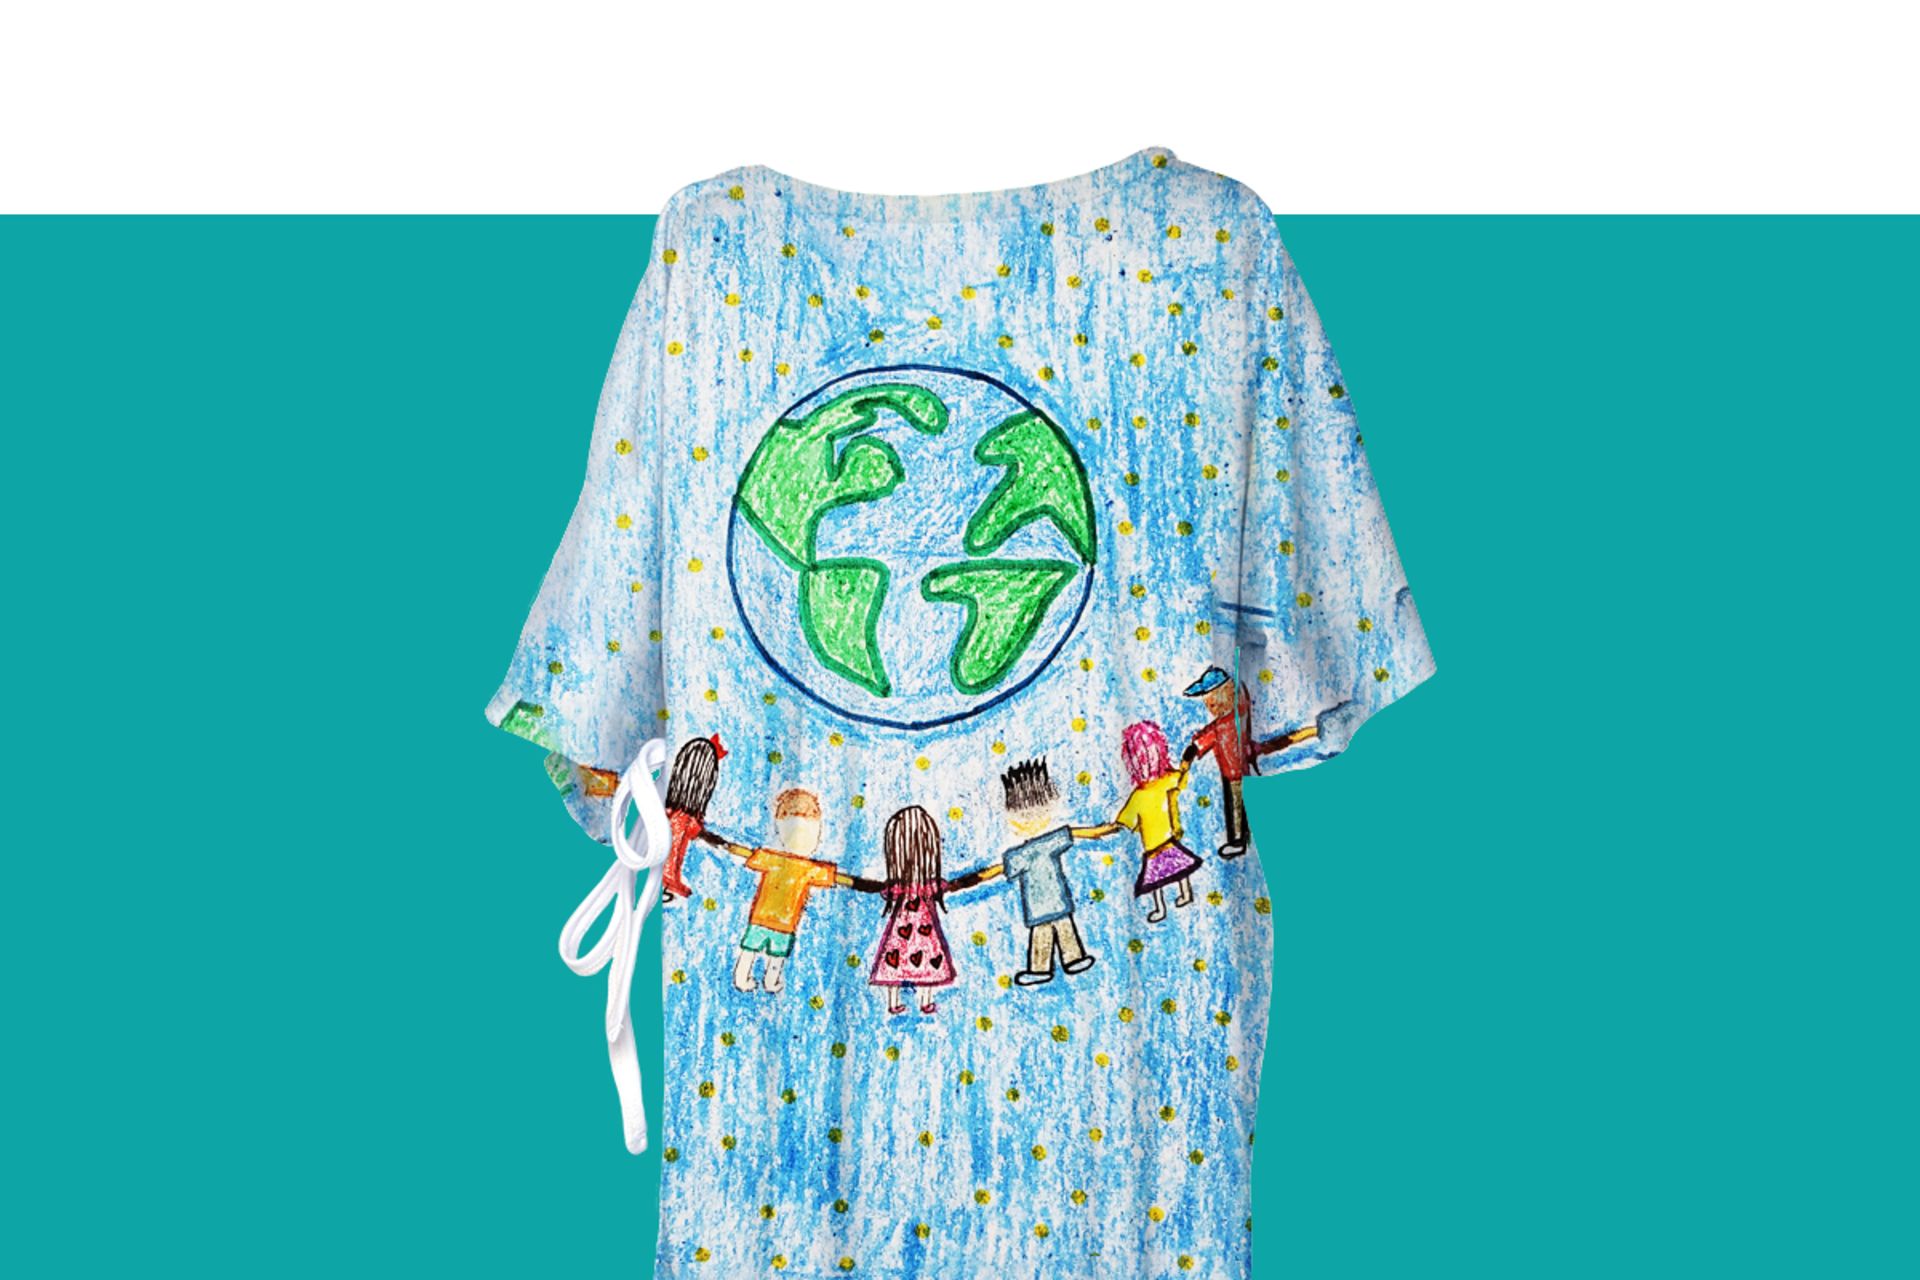 Hospital gown with a circle of friends surrounding the earth